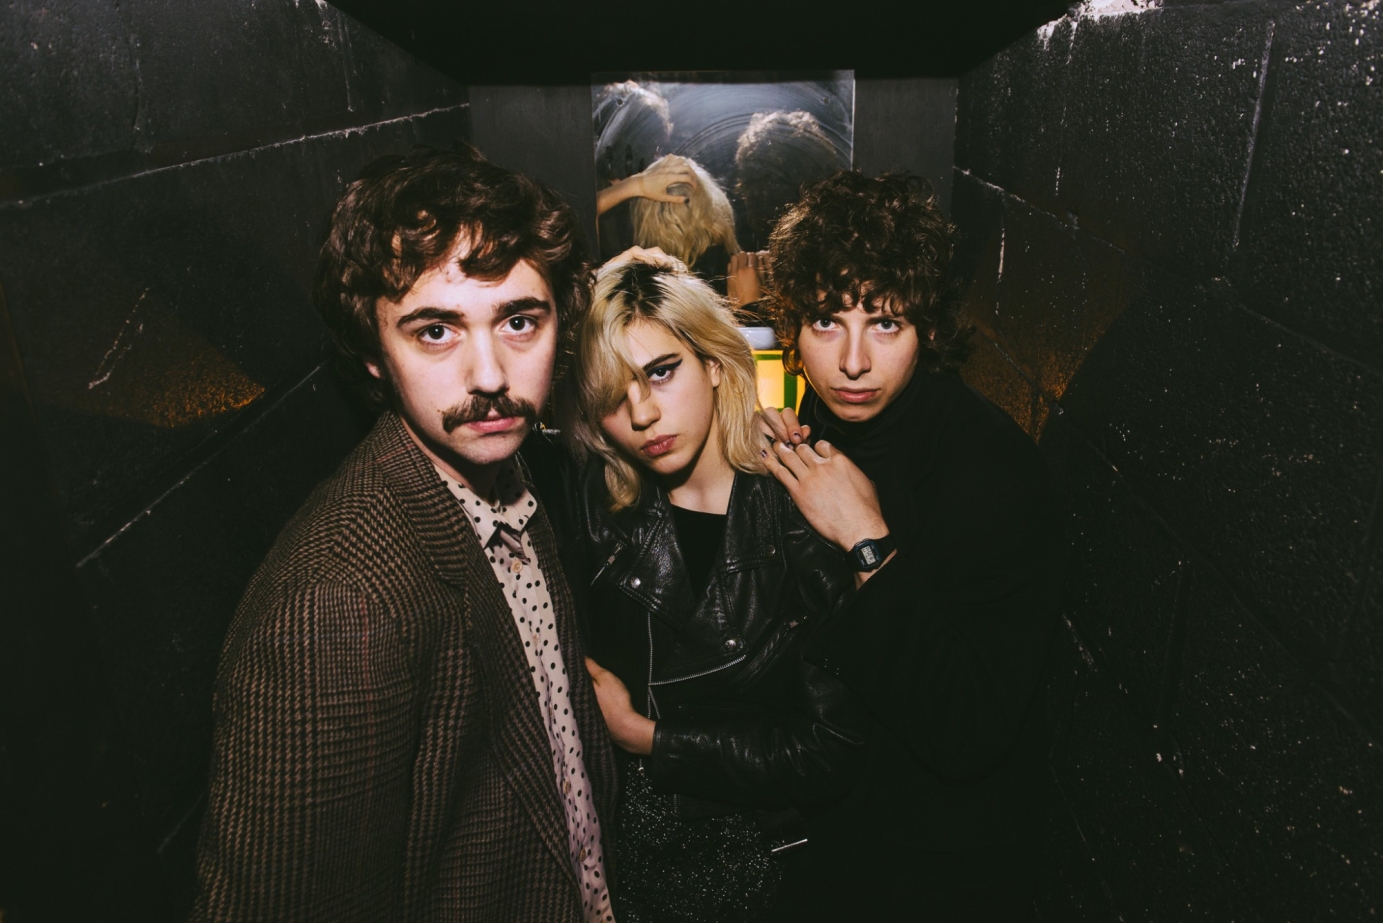 Photography for Sunflower Bean by Andy Sawyer